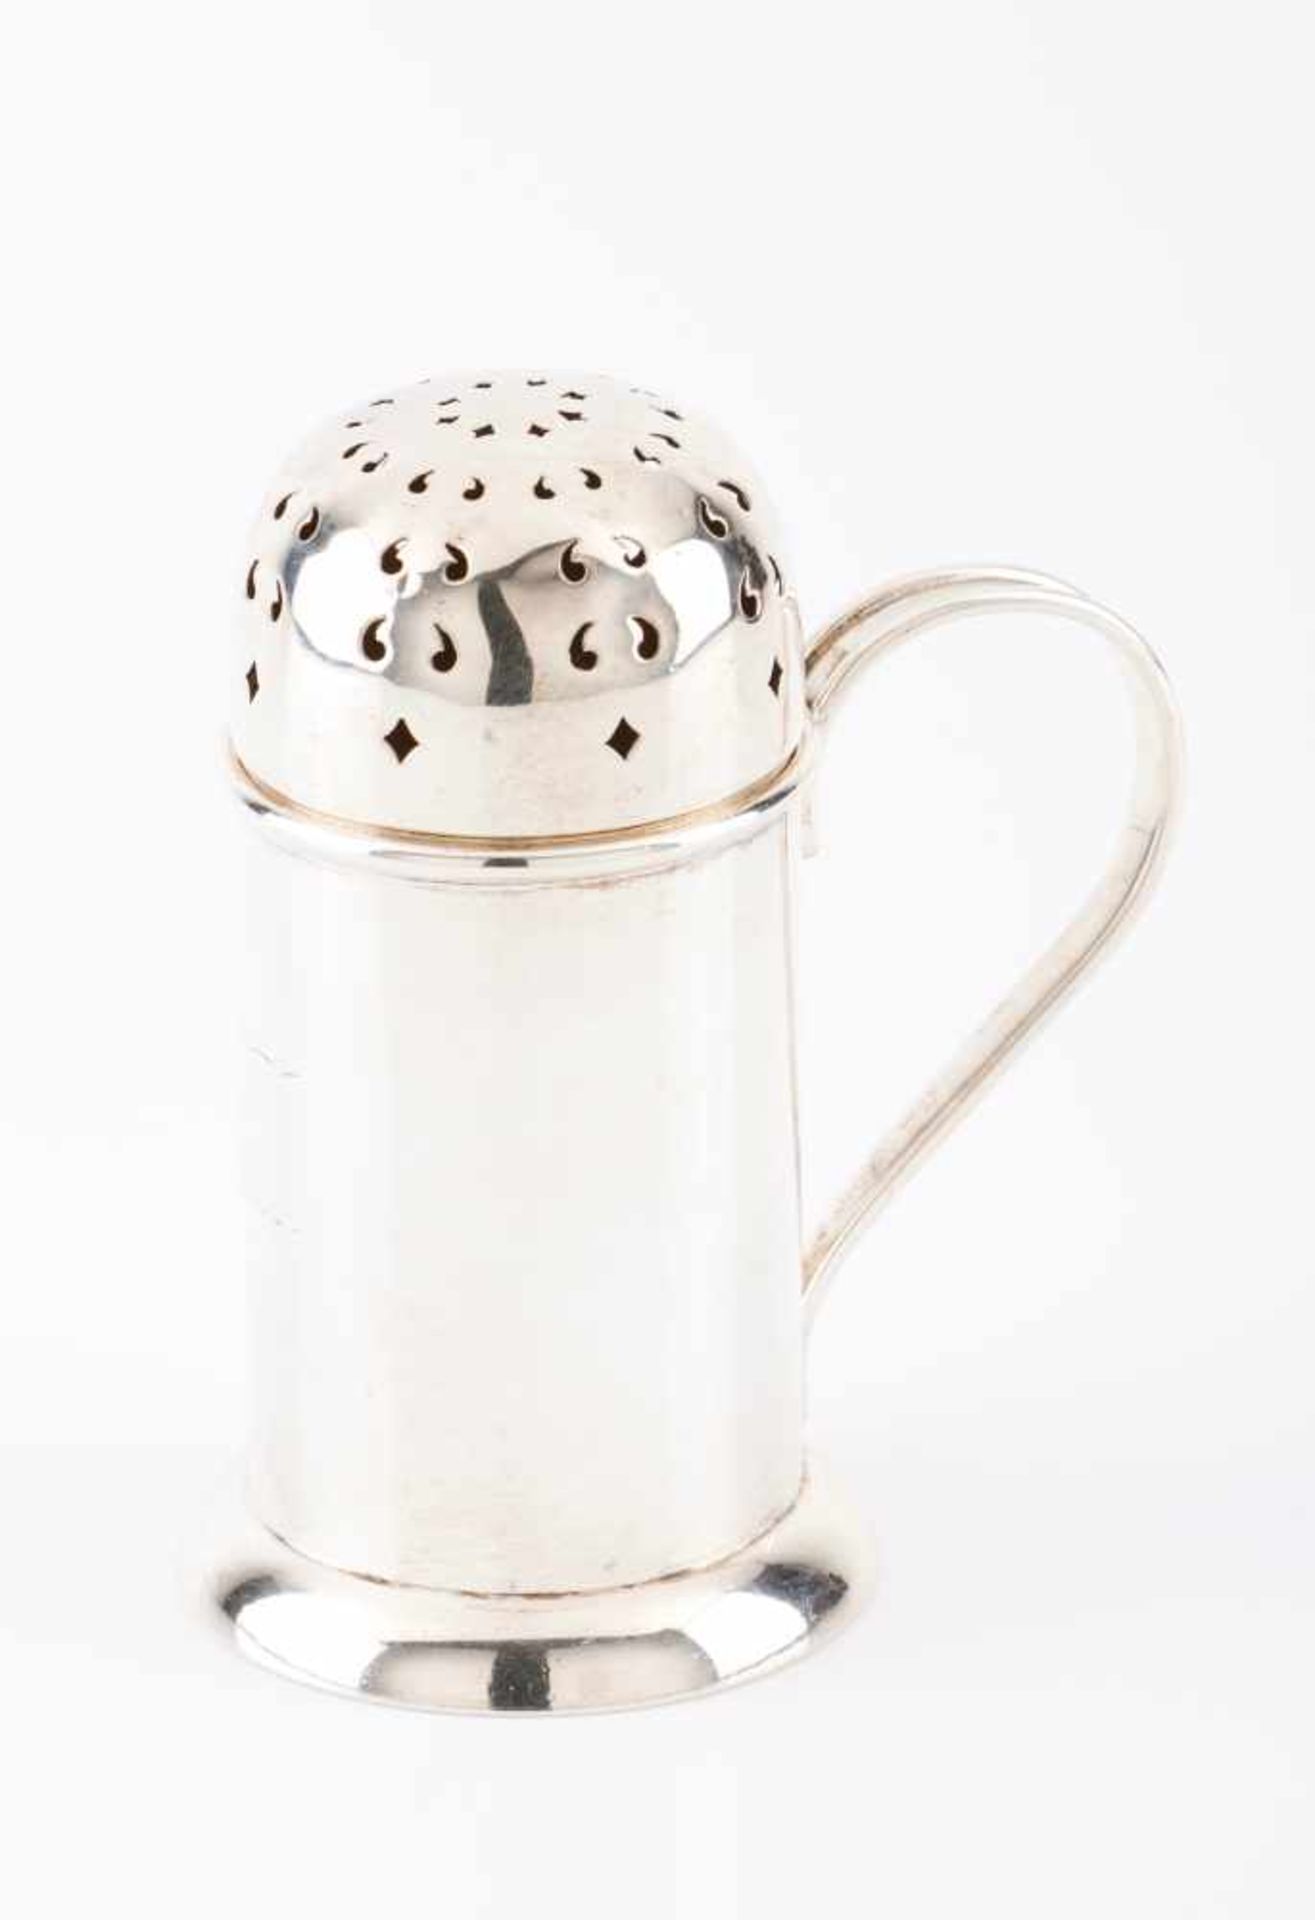 A cinnamon shakerScottish silverPlain body with engraved armorialEdinburgh assay mark for 1898 and